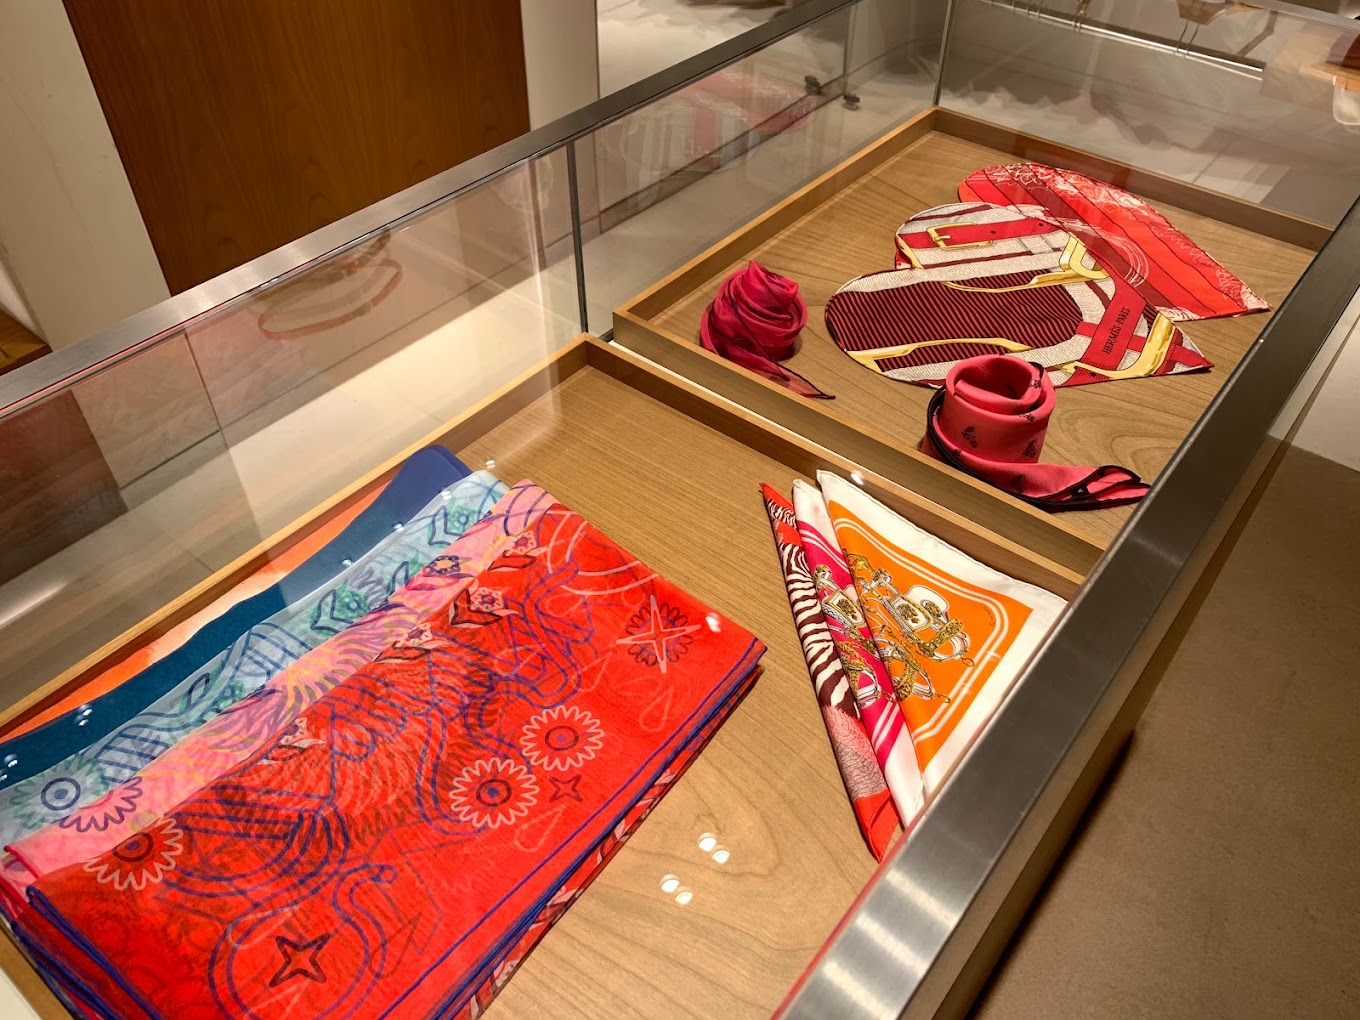 Hermès shops in londonEmbark on a journey of French luxury at Hermès shops in London. Explore a world of impeccable craftsmanship, timeless style, and exquisite accessories. Indulge in the iconic silk scarves, leather goods, and renowned Birkin and Kelly bags. Discover the artistry and elegance that define the Hermès brand and experience the epitome of luxury shopping. | hermes shops london | hermes boutique london | best hermes store in london | hermes london online store | hermes store london